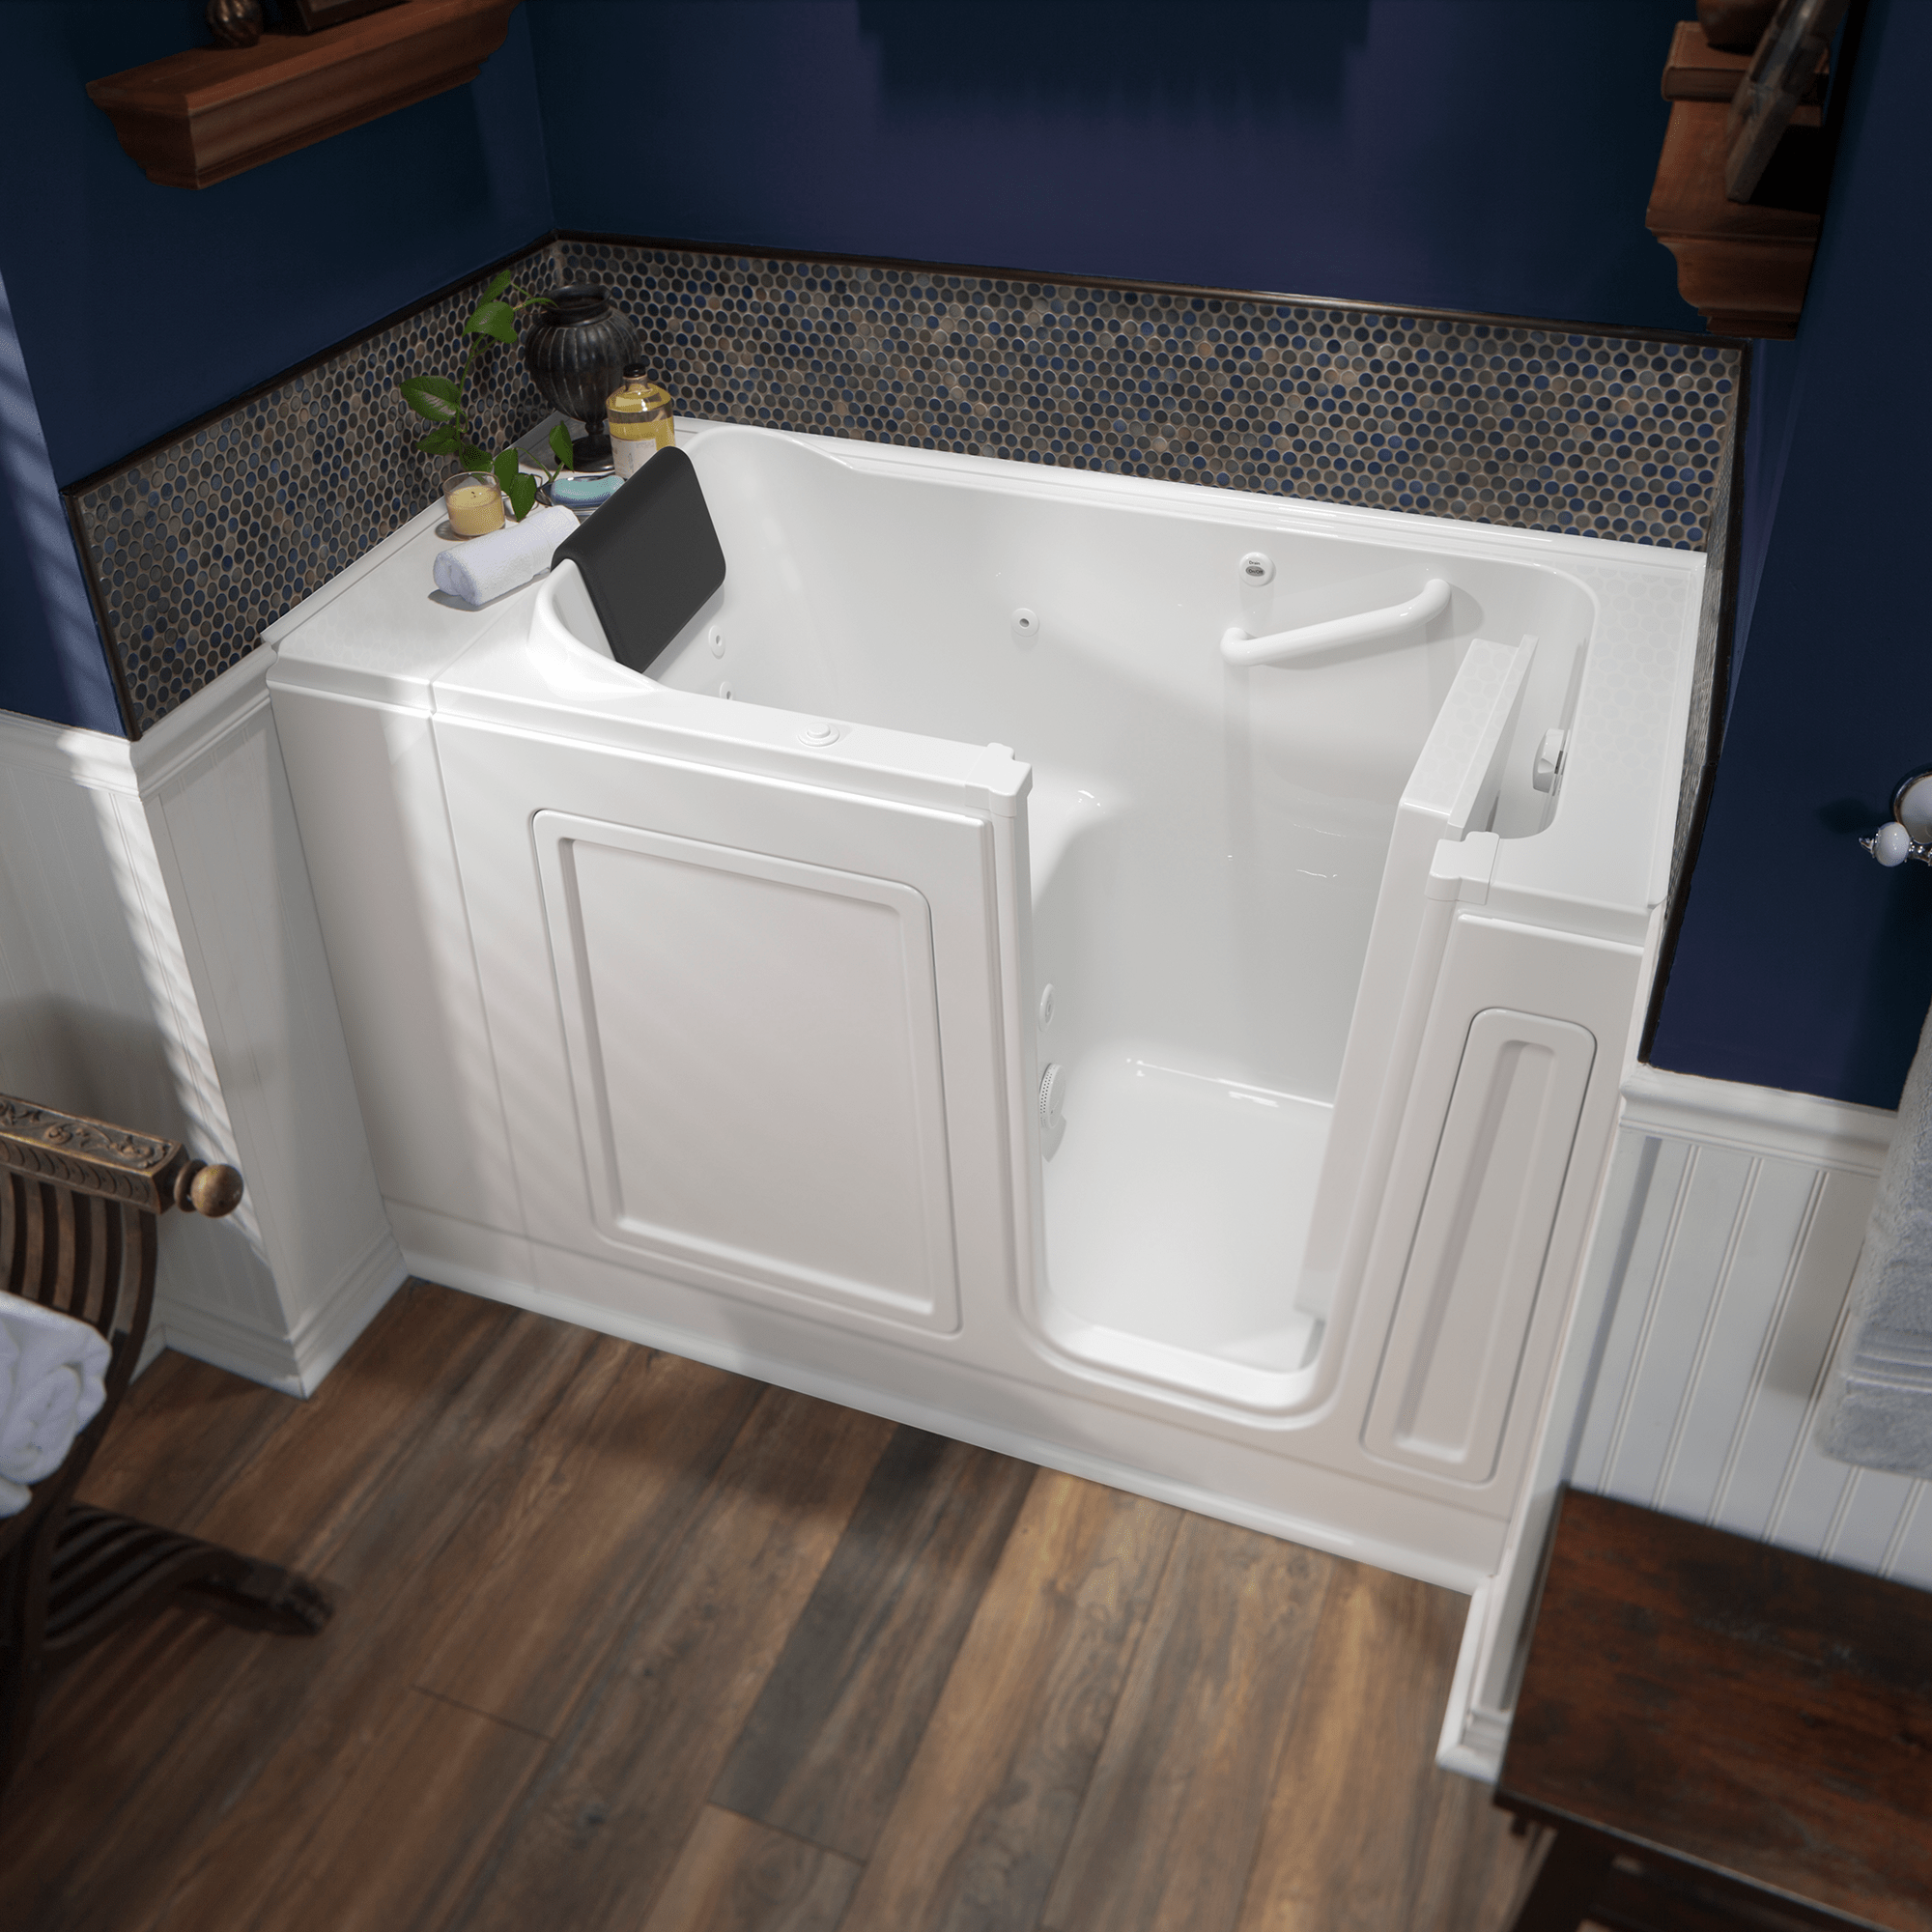 Acrylic Luxury Series 28 x 48-Inch Walk-in Tub With Whirlpool System - Right-Hand Drain